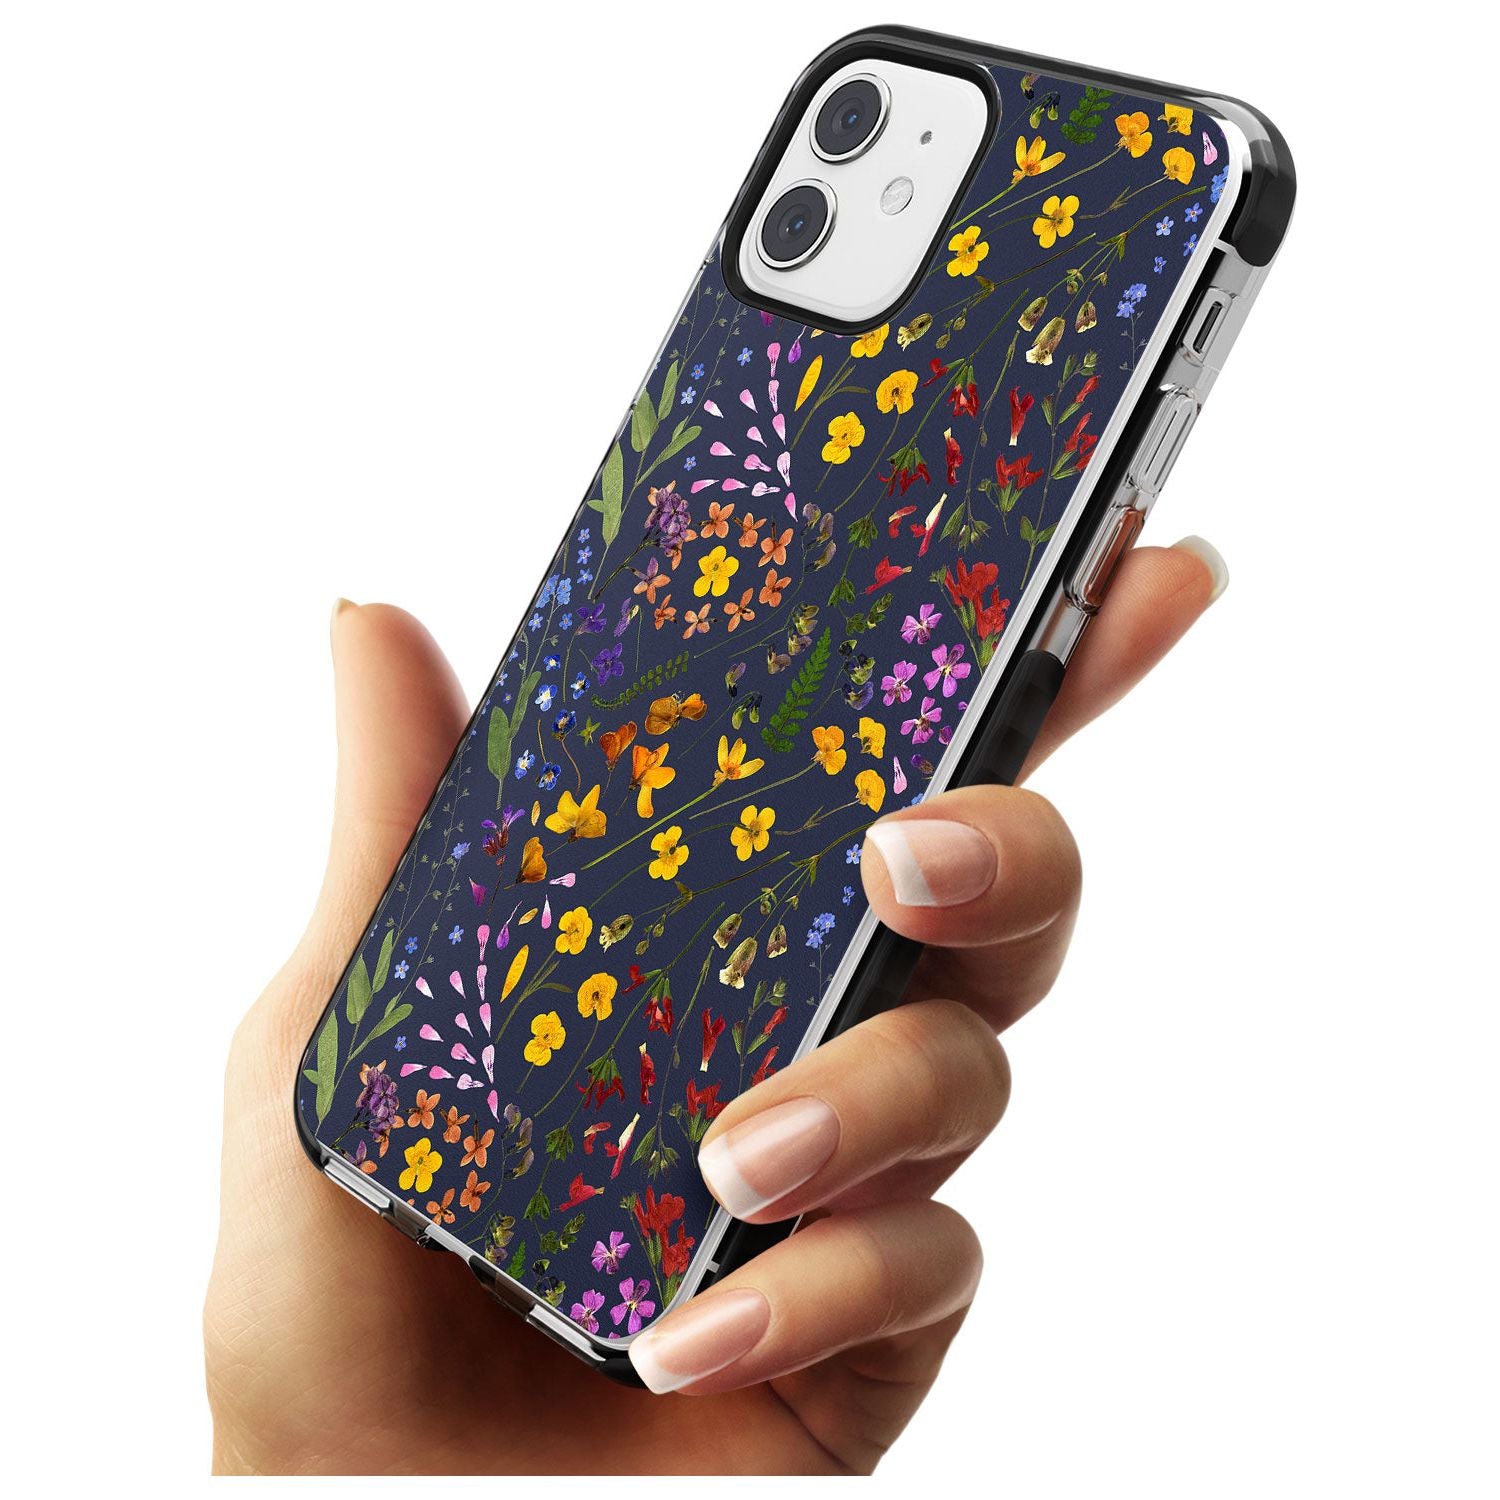 Wildflower & Leaves Cluster Design - Navy Black Impact Phone Case for iPhone 11